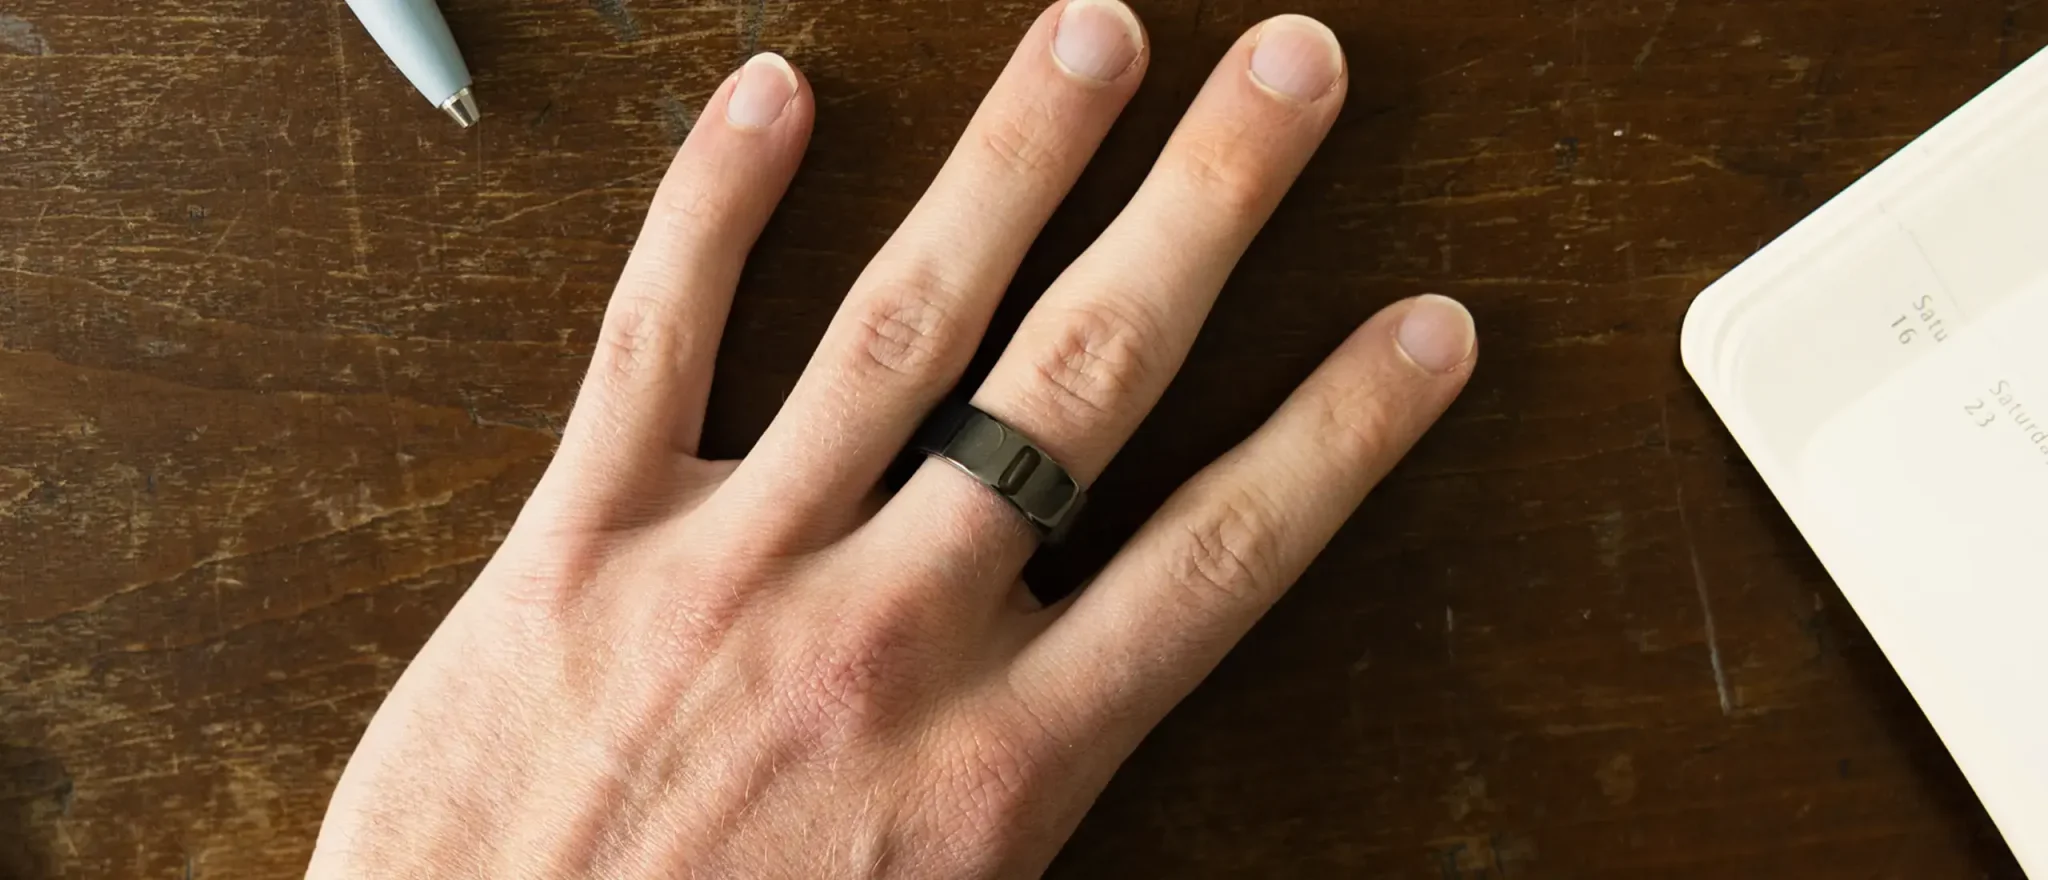 Our Honest Review of the Ultrahuman Air, a Smart Ring That Tracks a Little Bit of Everything